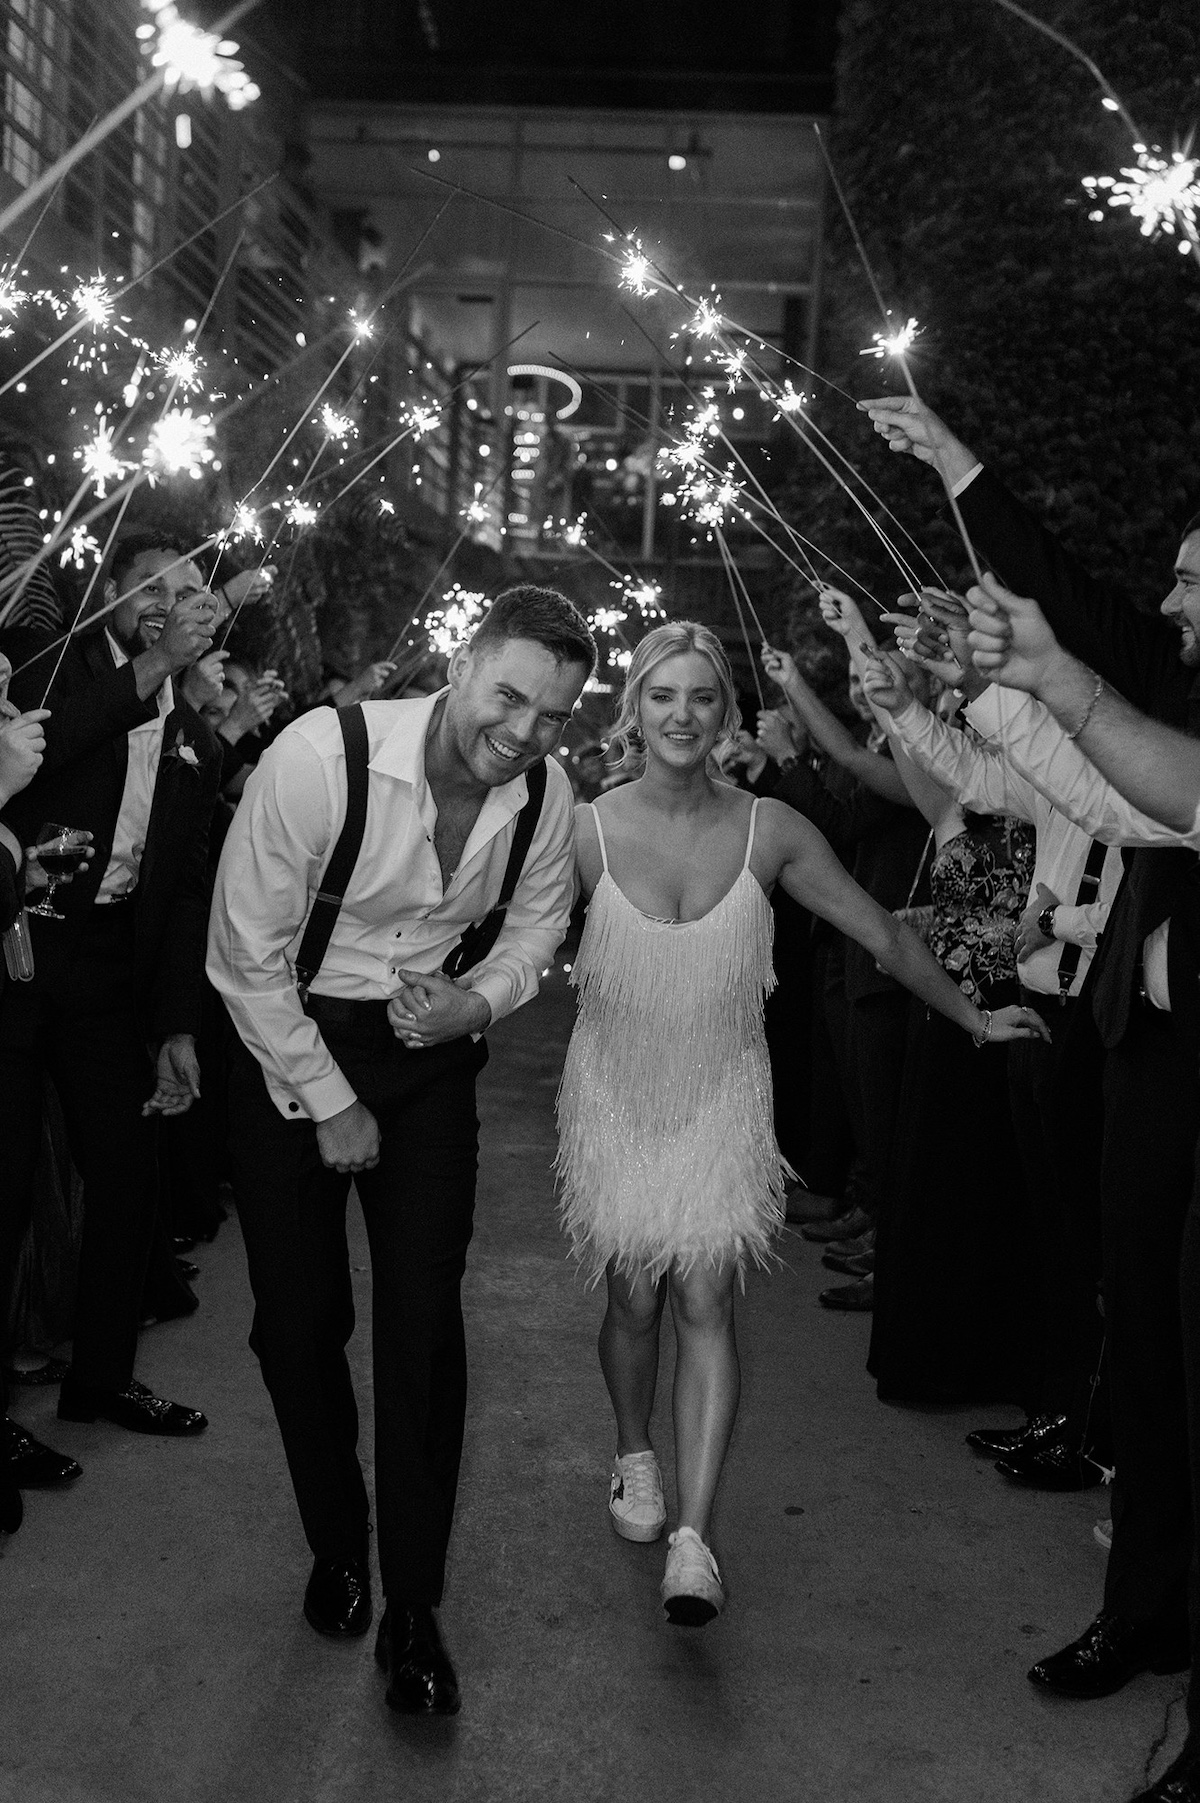 A sparkler send-off illuminates the night as guests bid farewell to the newlyweds, marking the end of a joyous celebration at Kelly and Adam's wedding.